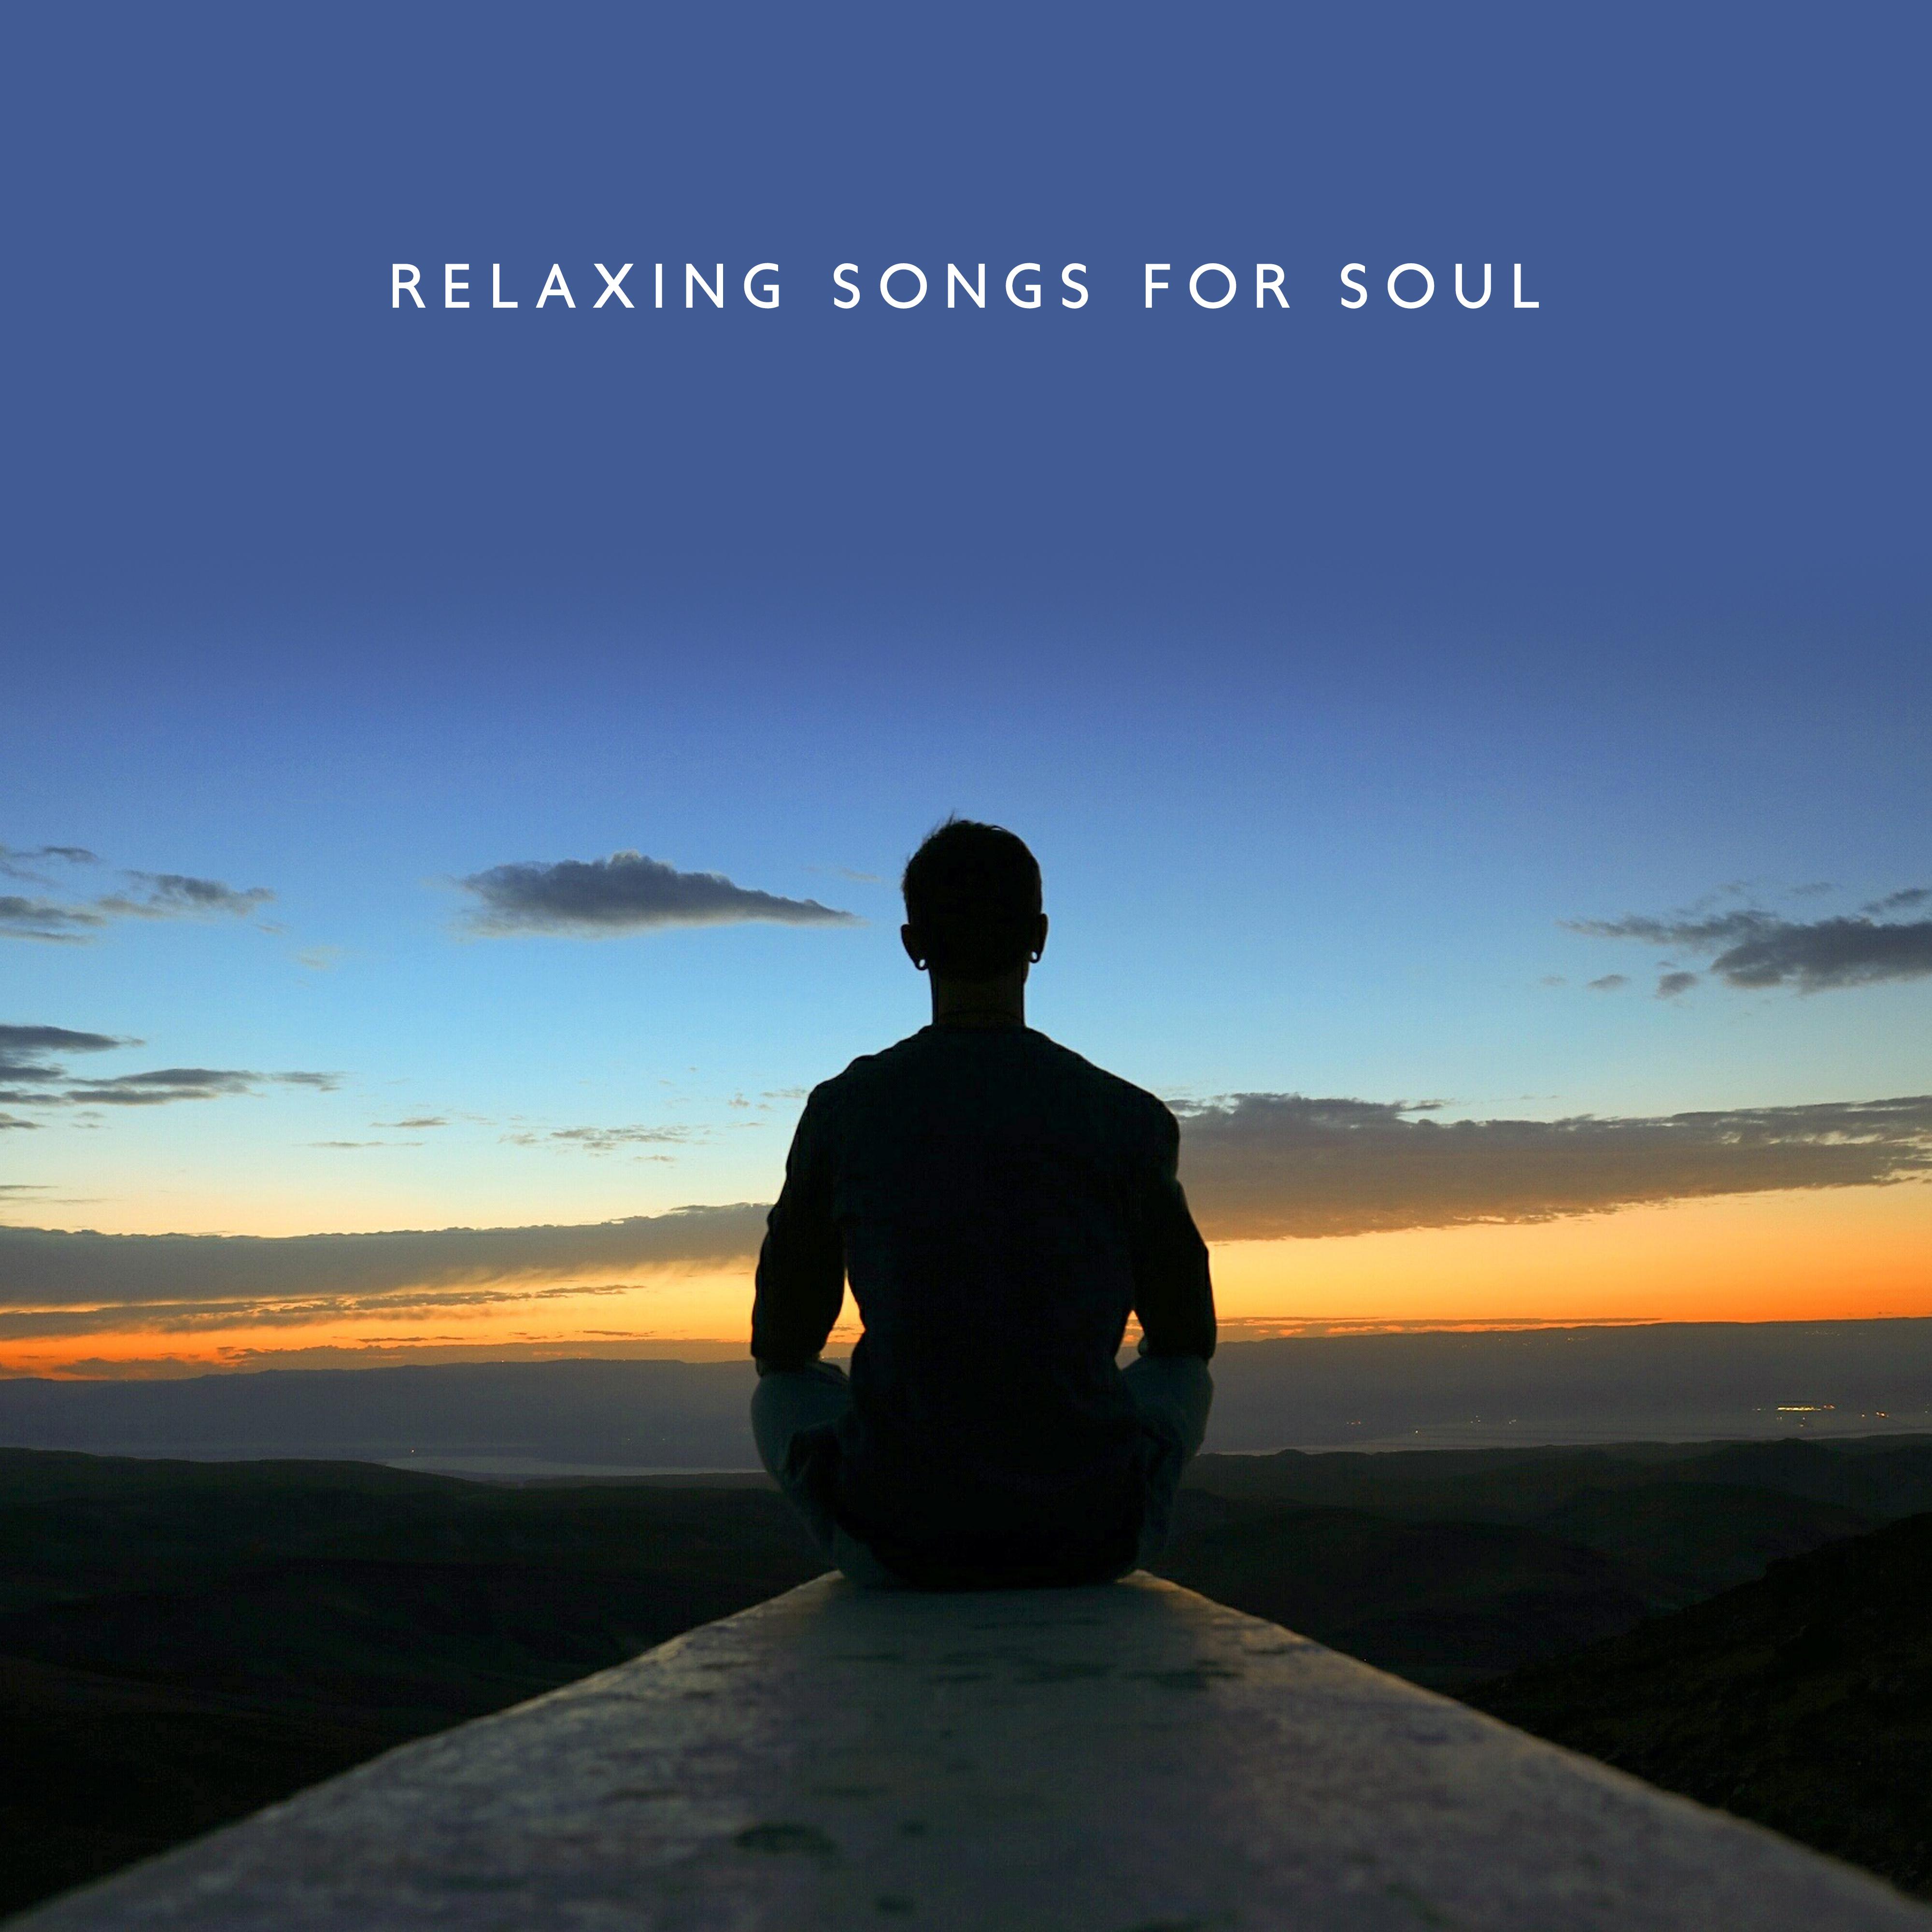 Relaxing Songs for Soul  Meditation Music Zone, Yoga Music to Calm Down, Meditation Therapy, Gentle Melodies for Meditation, Sleep, Yoga, Pure Relaxation